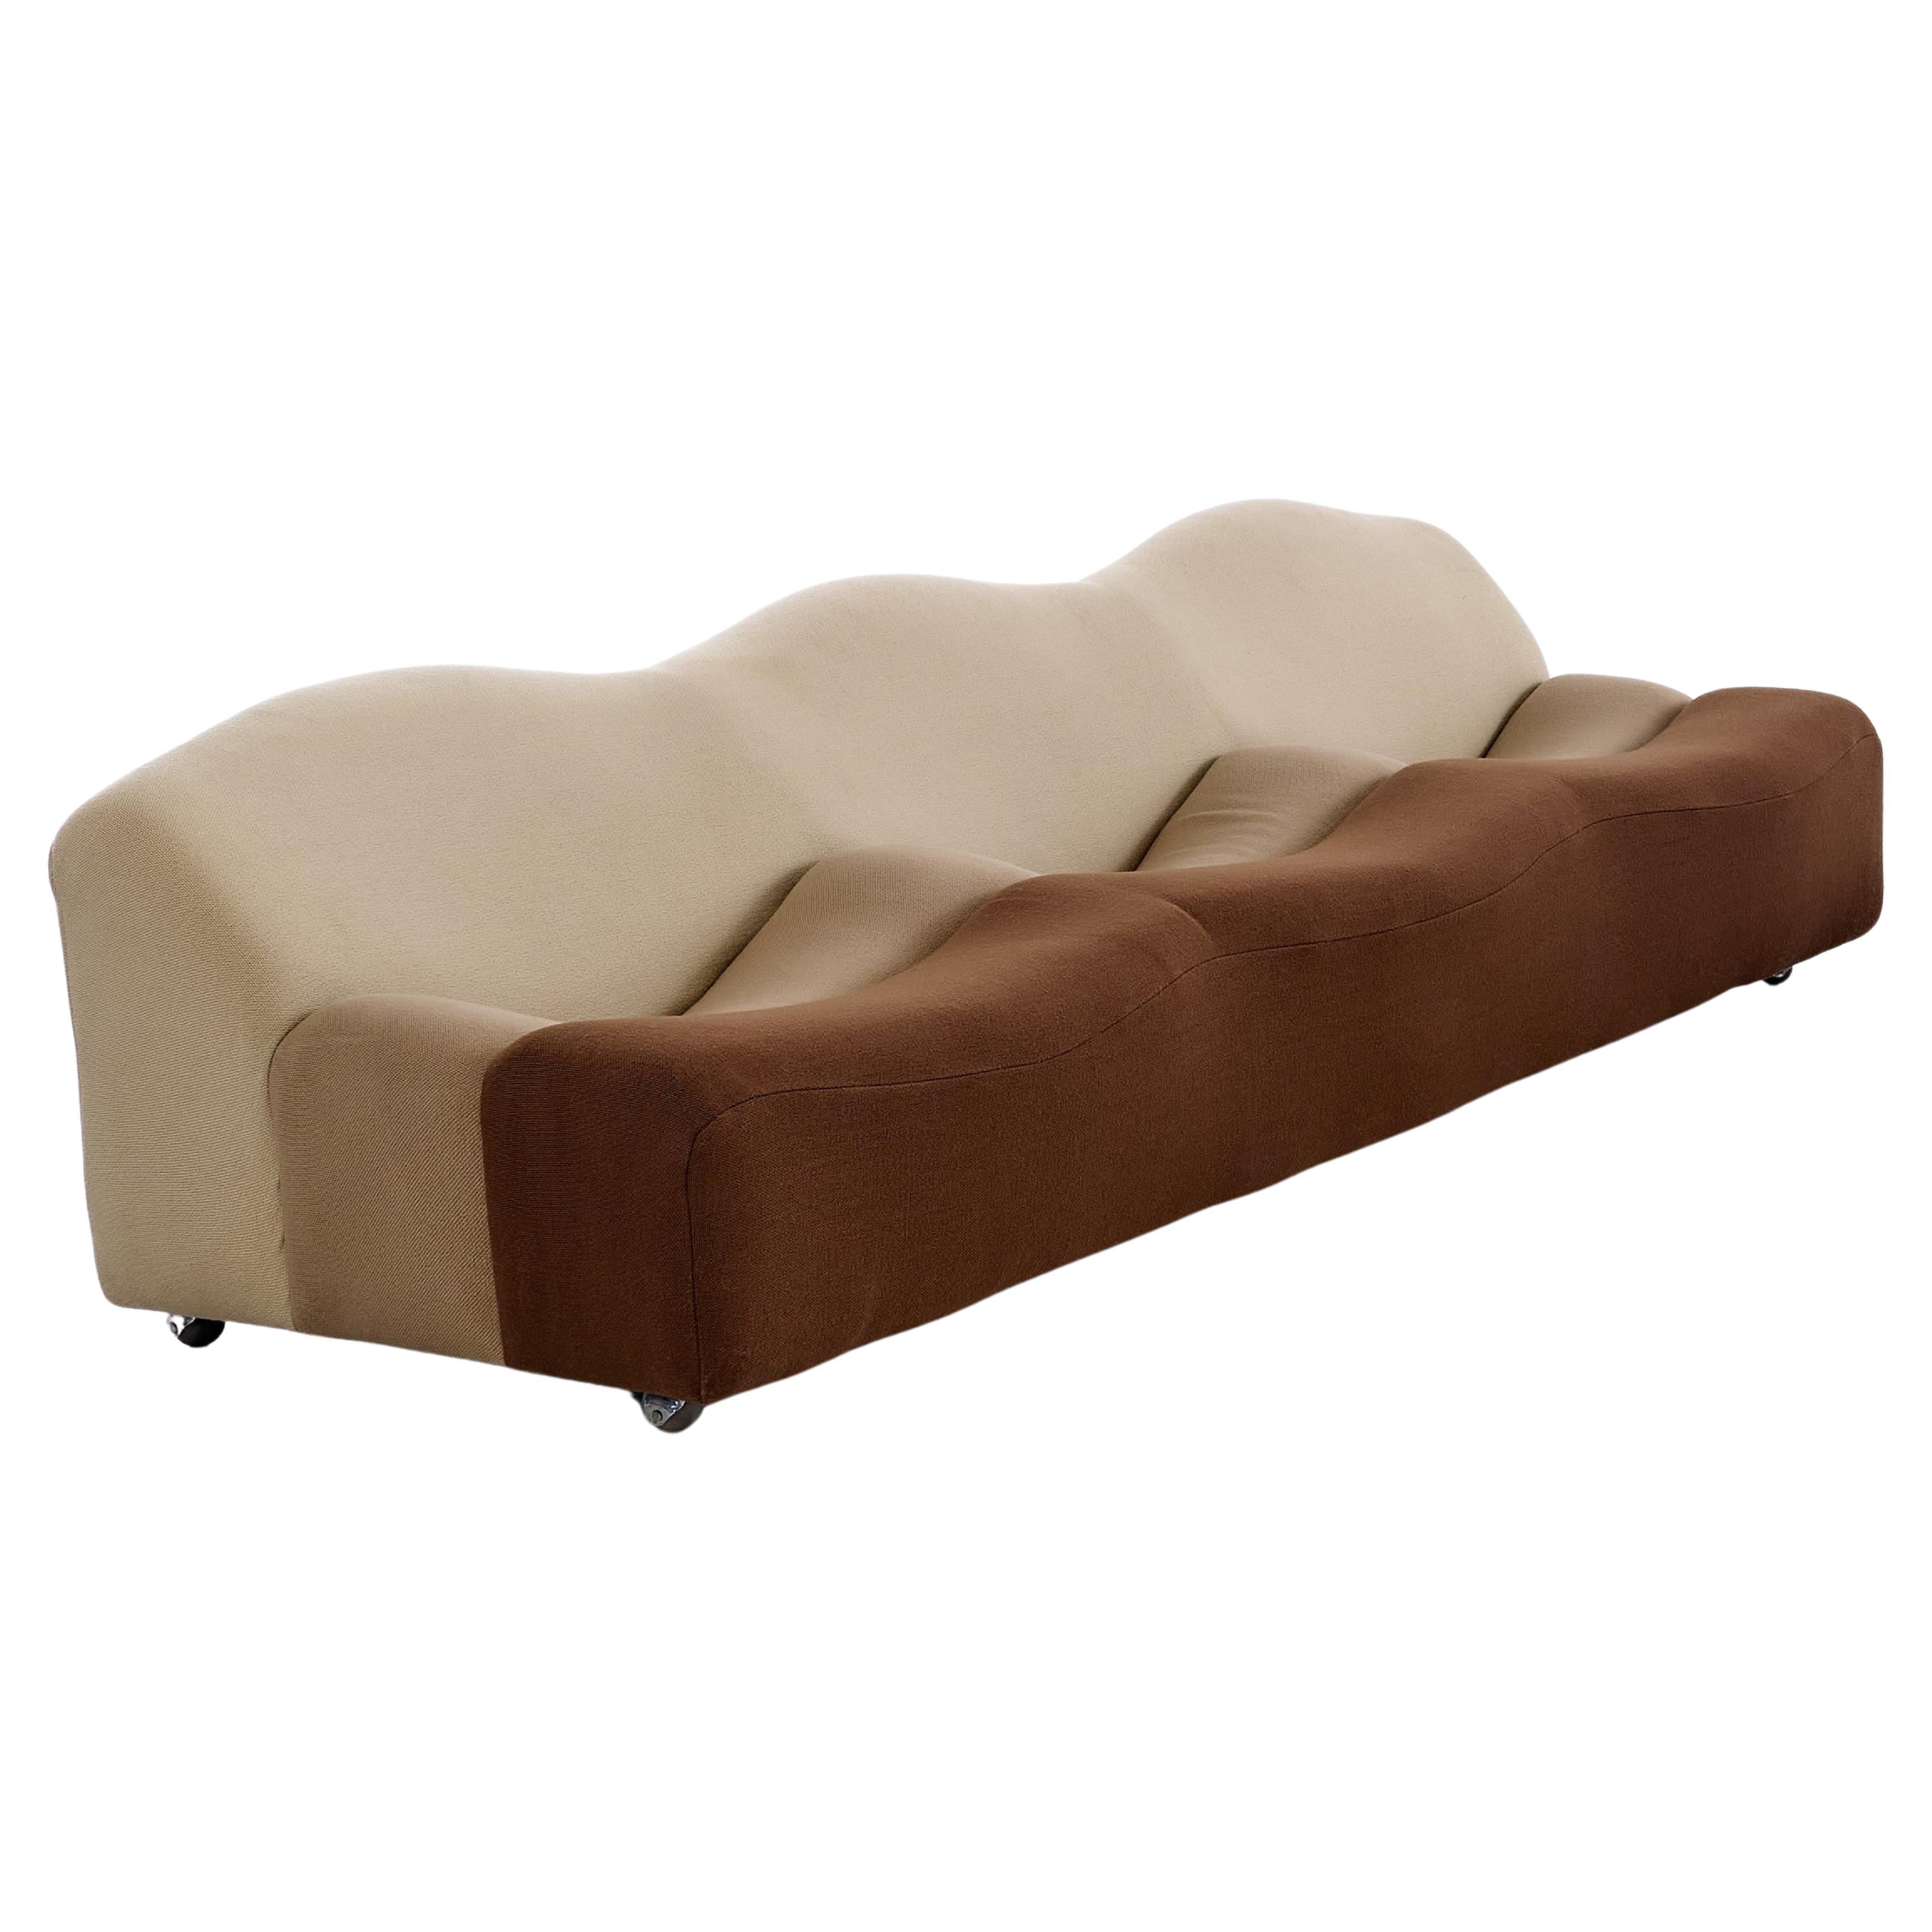 ABCD 3 Seater Sofa by Pierre Paulin for Artifort, Netherlands, 1969 For Sale